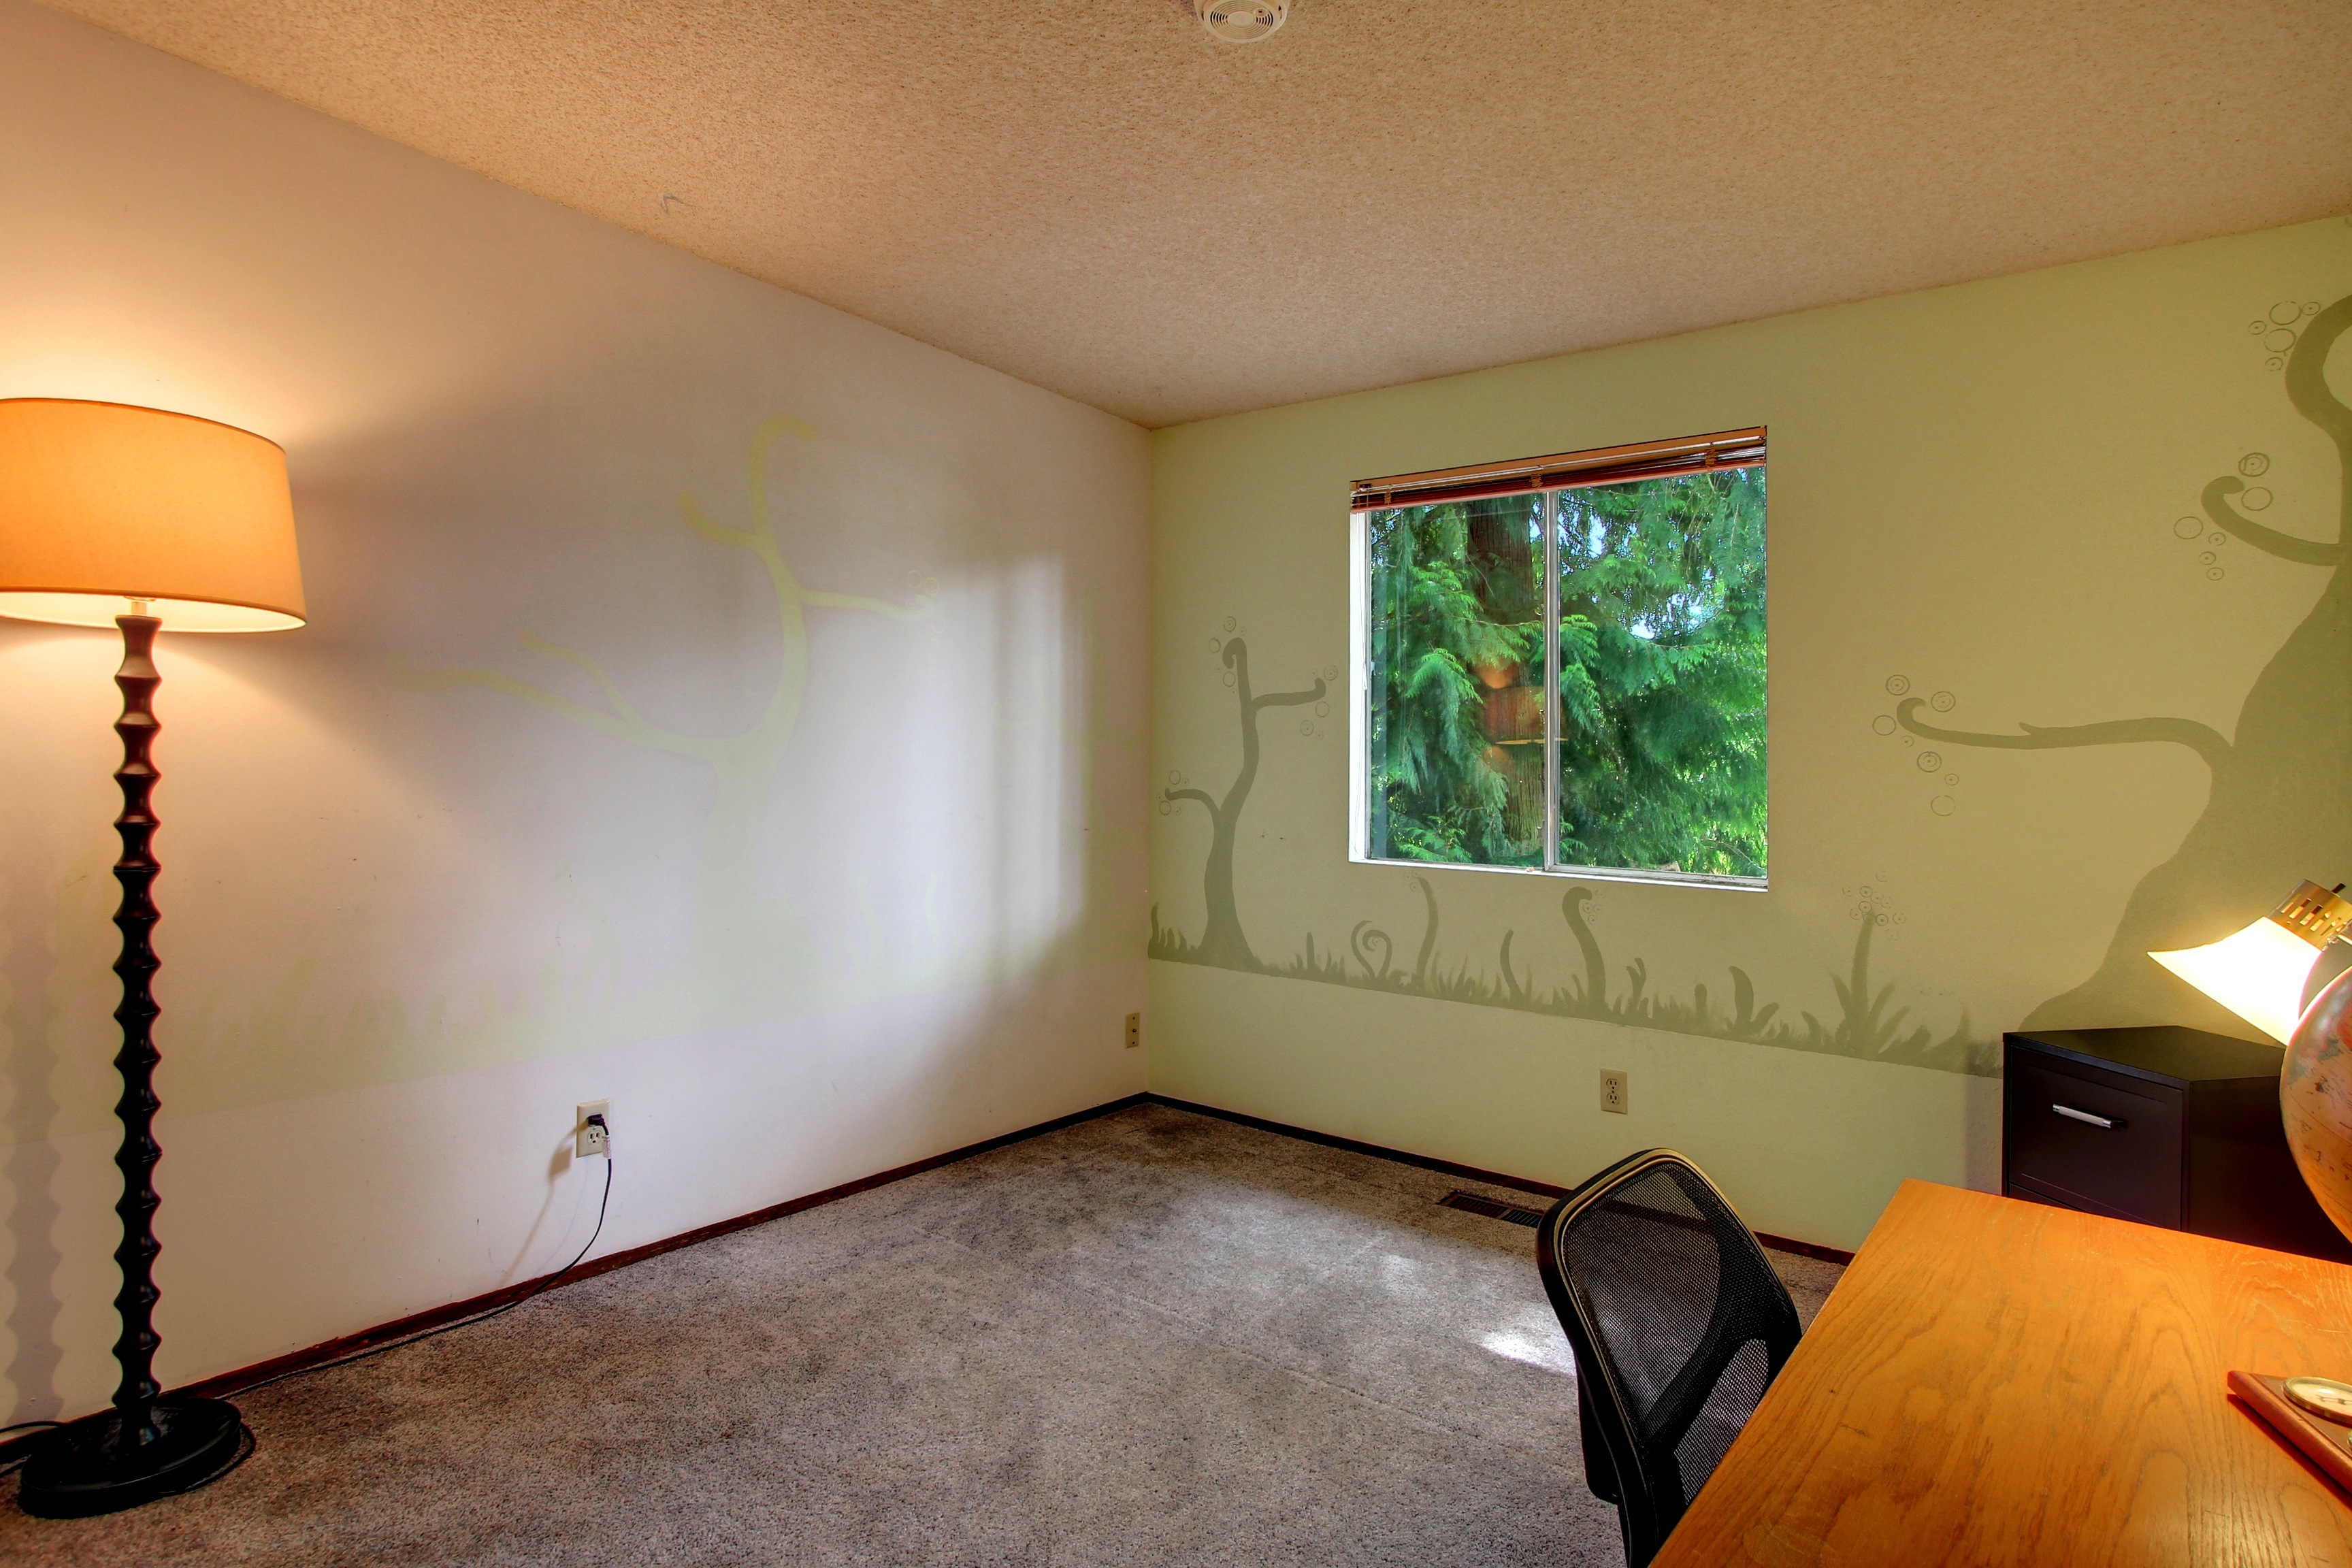 Property Photo: Bedroom 5313 144th Place SW  WA 98026 